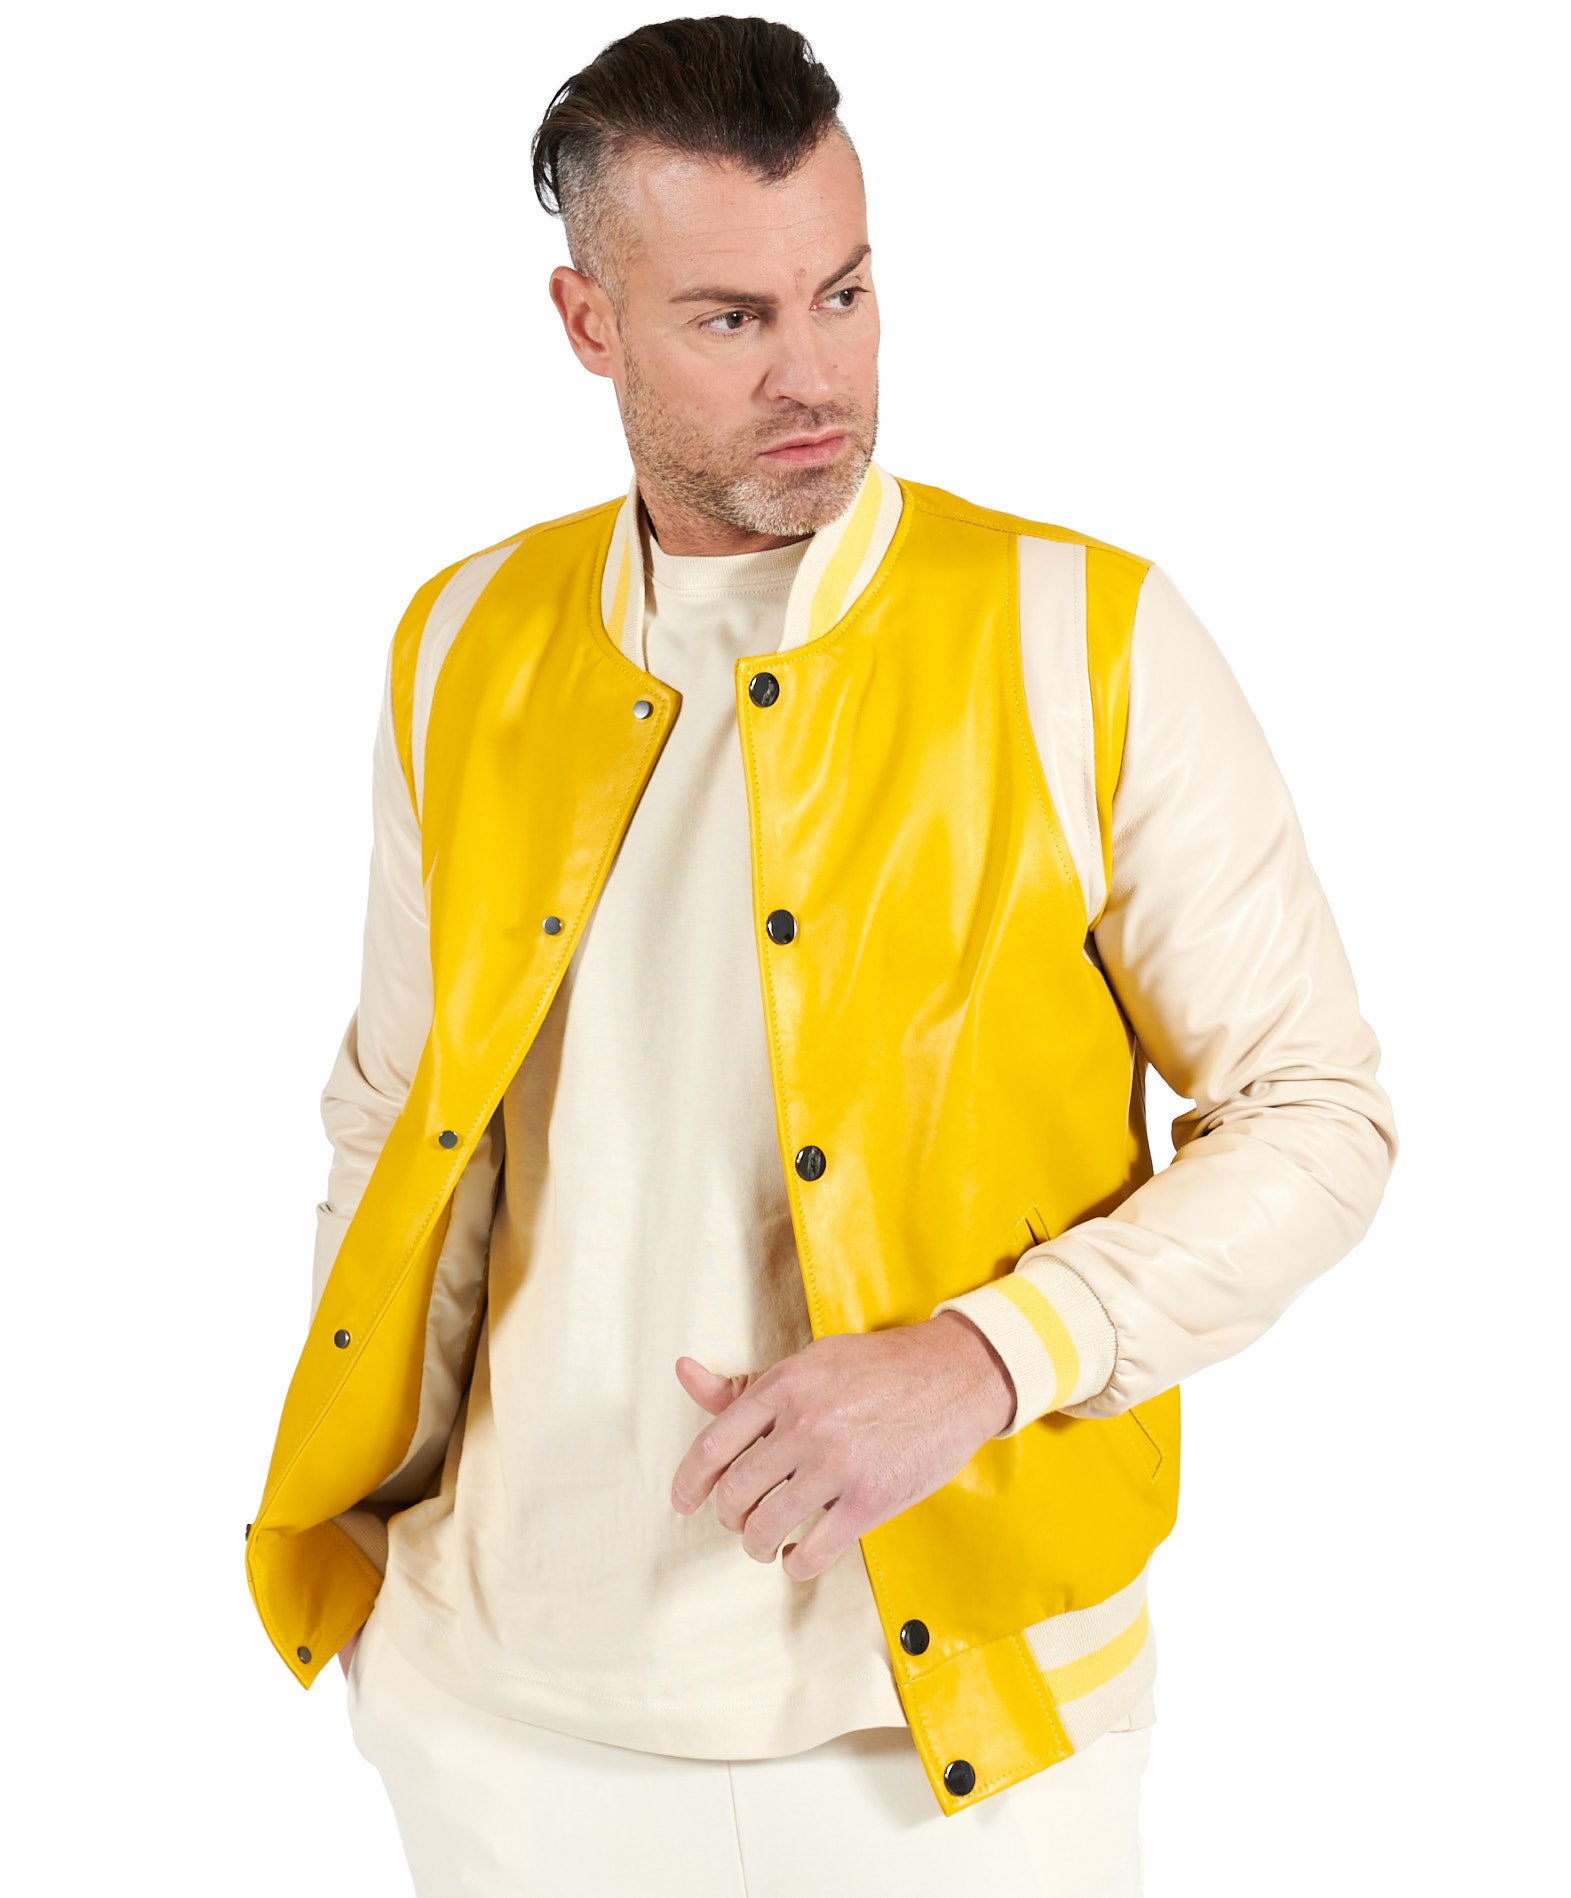 Mirrorball Jacket - Men - OBSOLETES DO NOT TOUCH